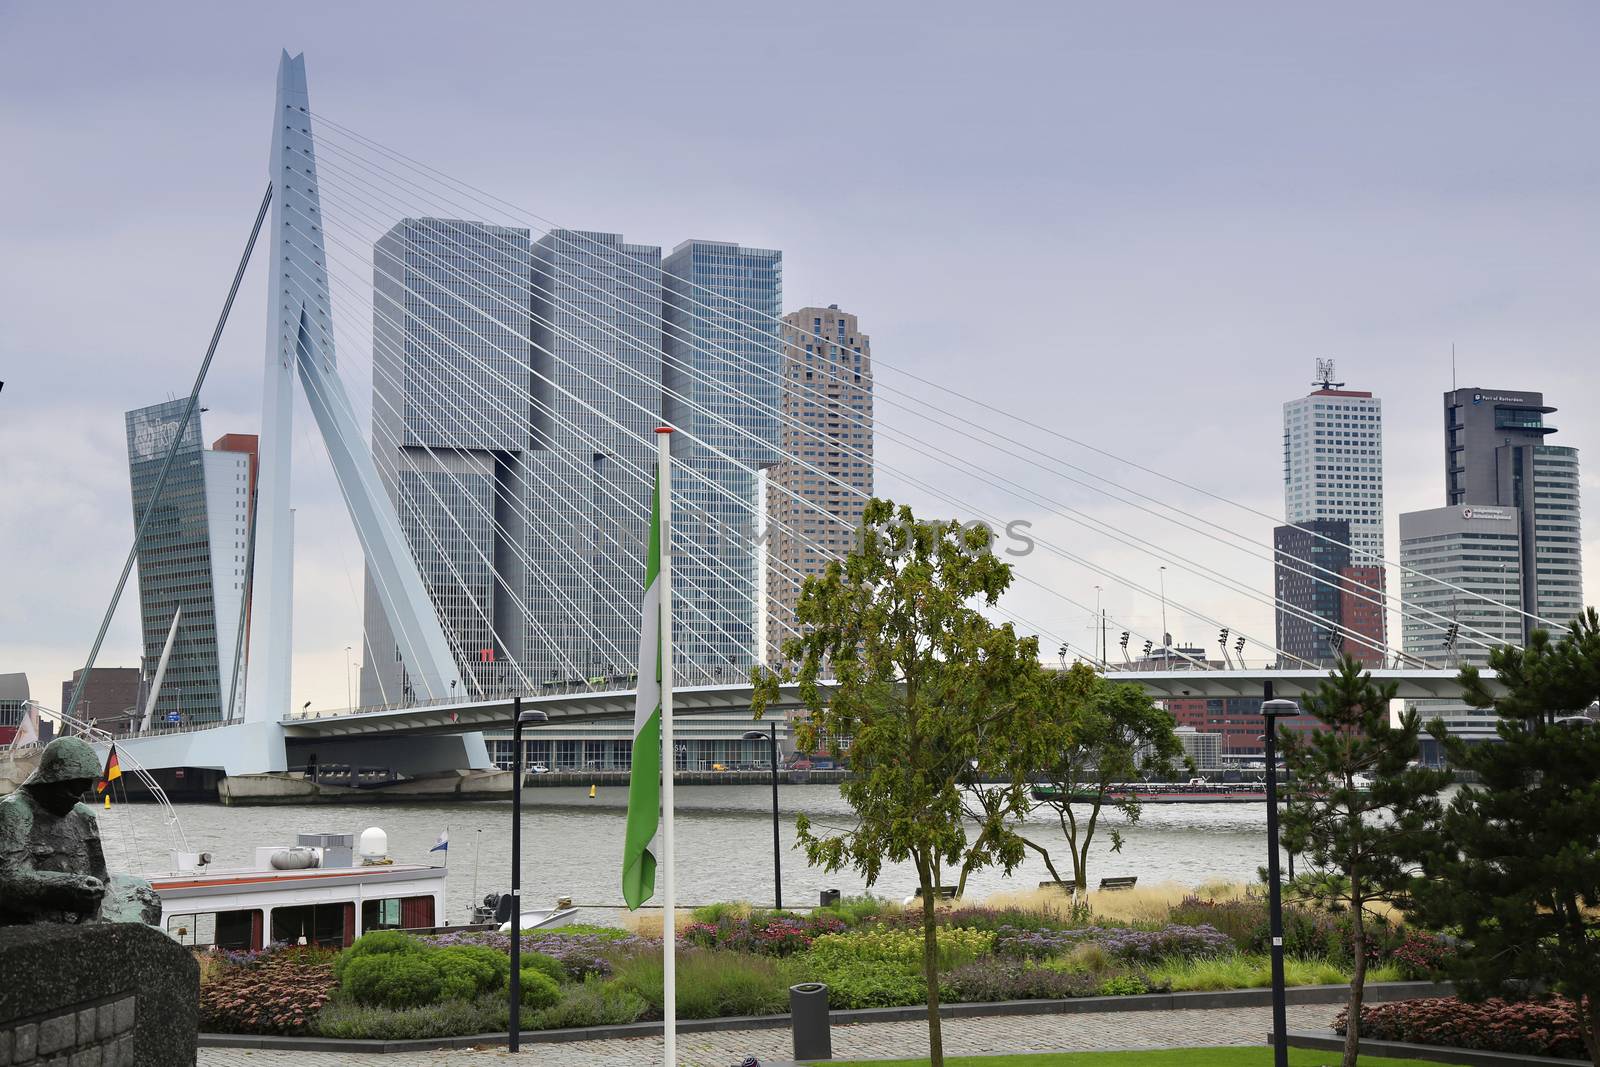 ROTTERDAM, THE NETHERLANDS - 18 AUGUST: Rotterdam is a city modern architecture, view on Erasmus Bridge and skyline of Rotterdam, river Maas in Rotterdam, Netherlands on August 18,2015.